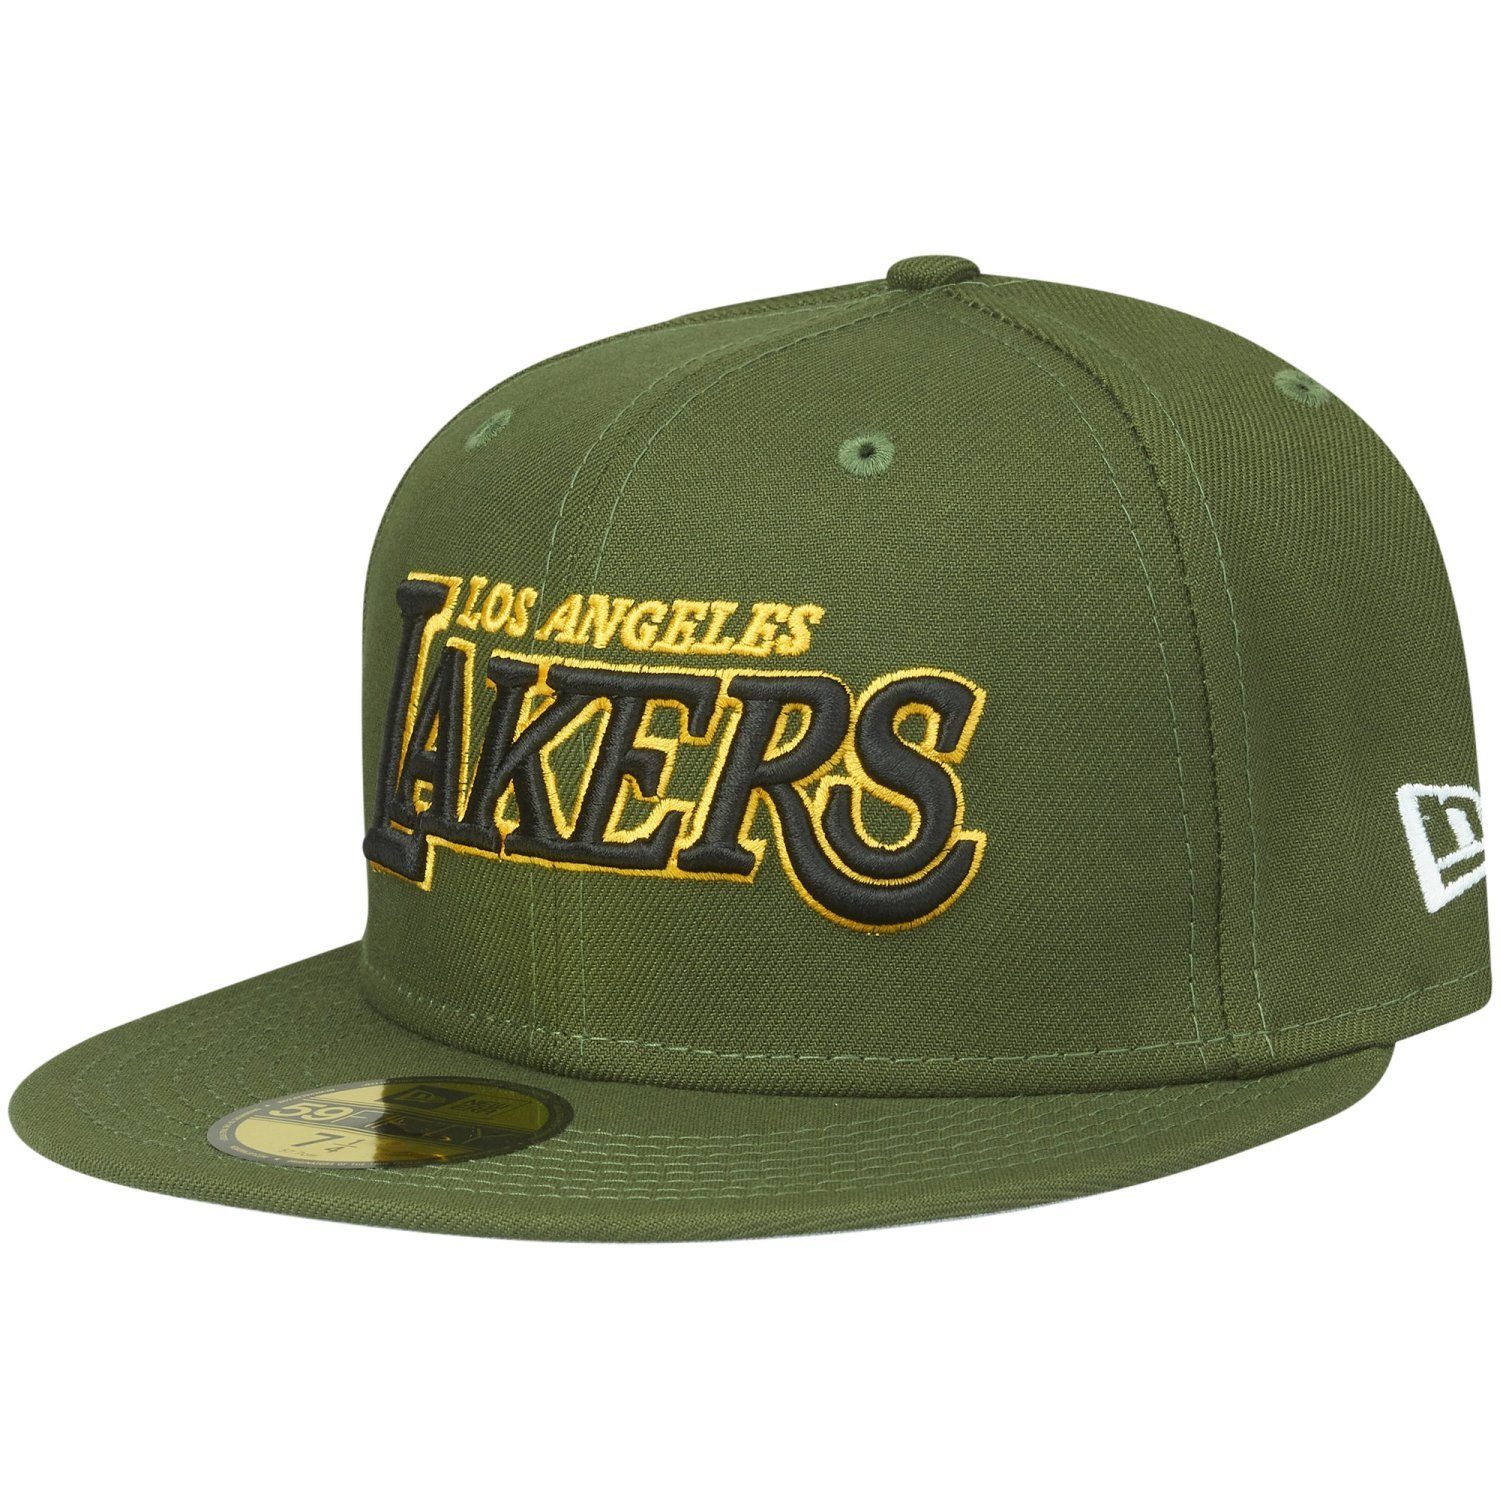 Fitted New 59Fifty Cap Lakers Angeles Los olive Era